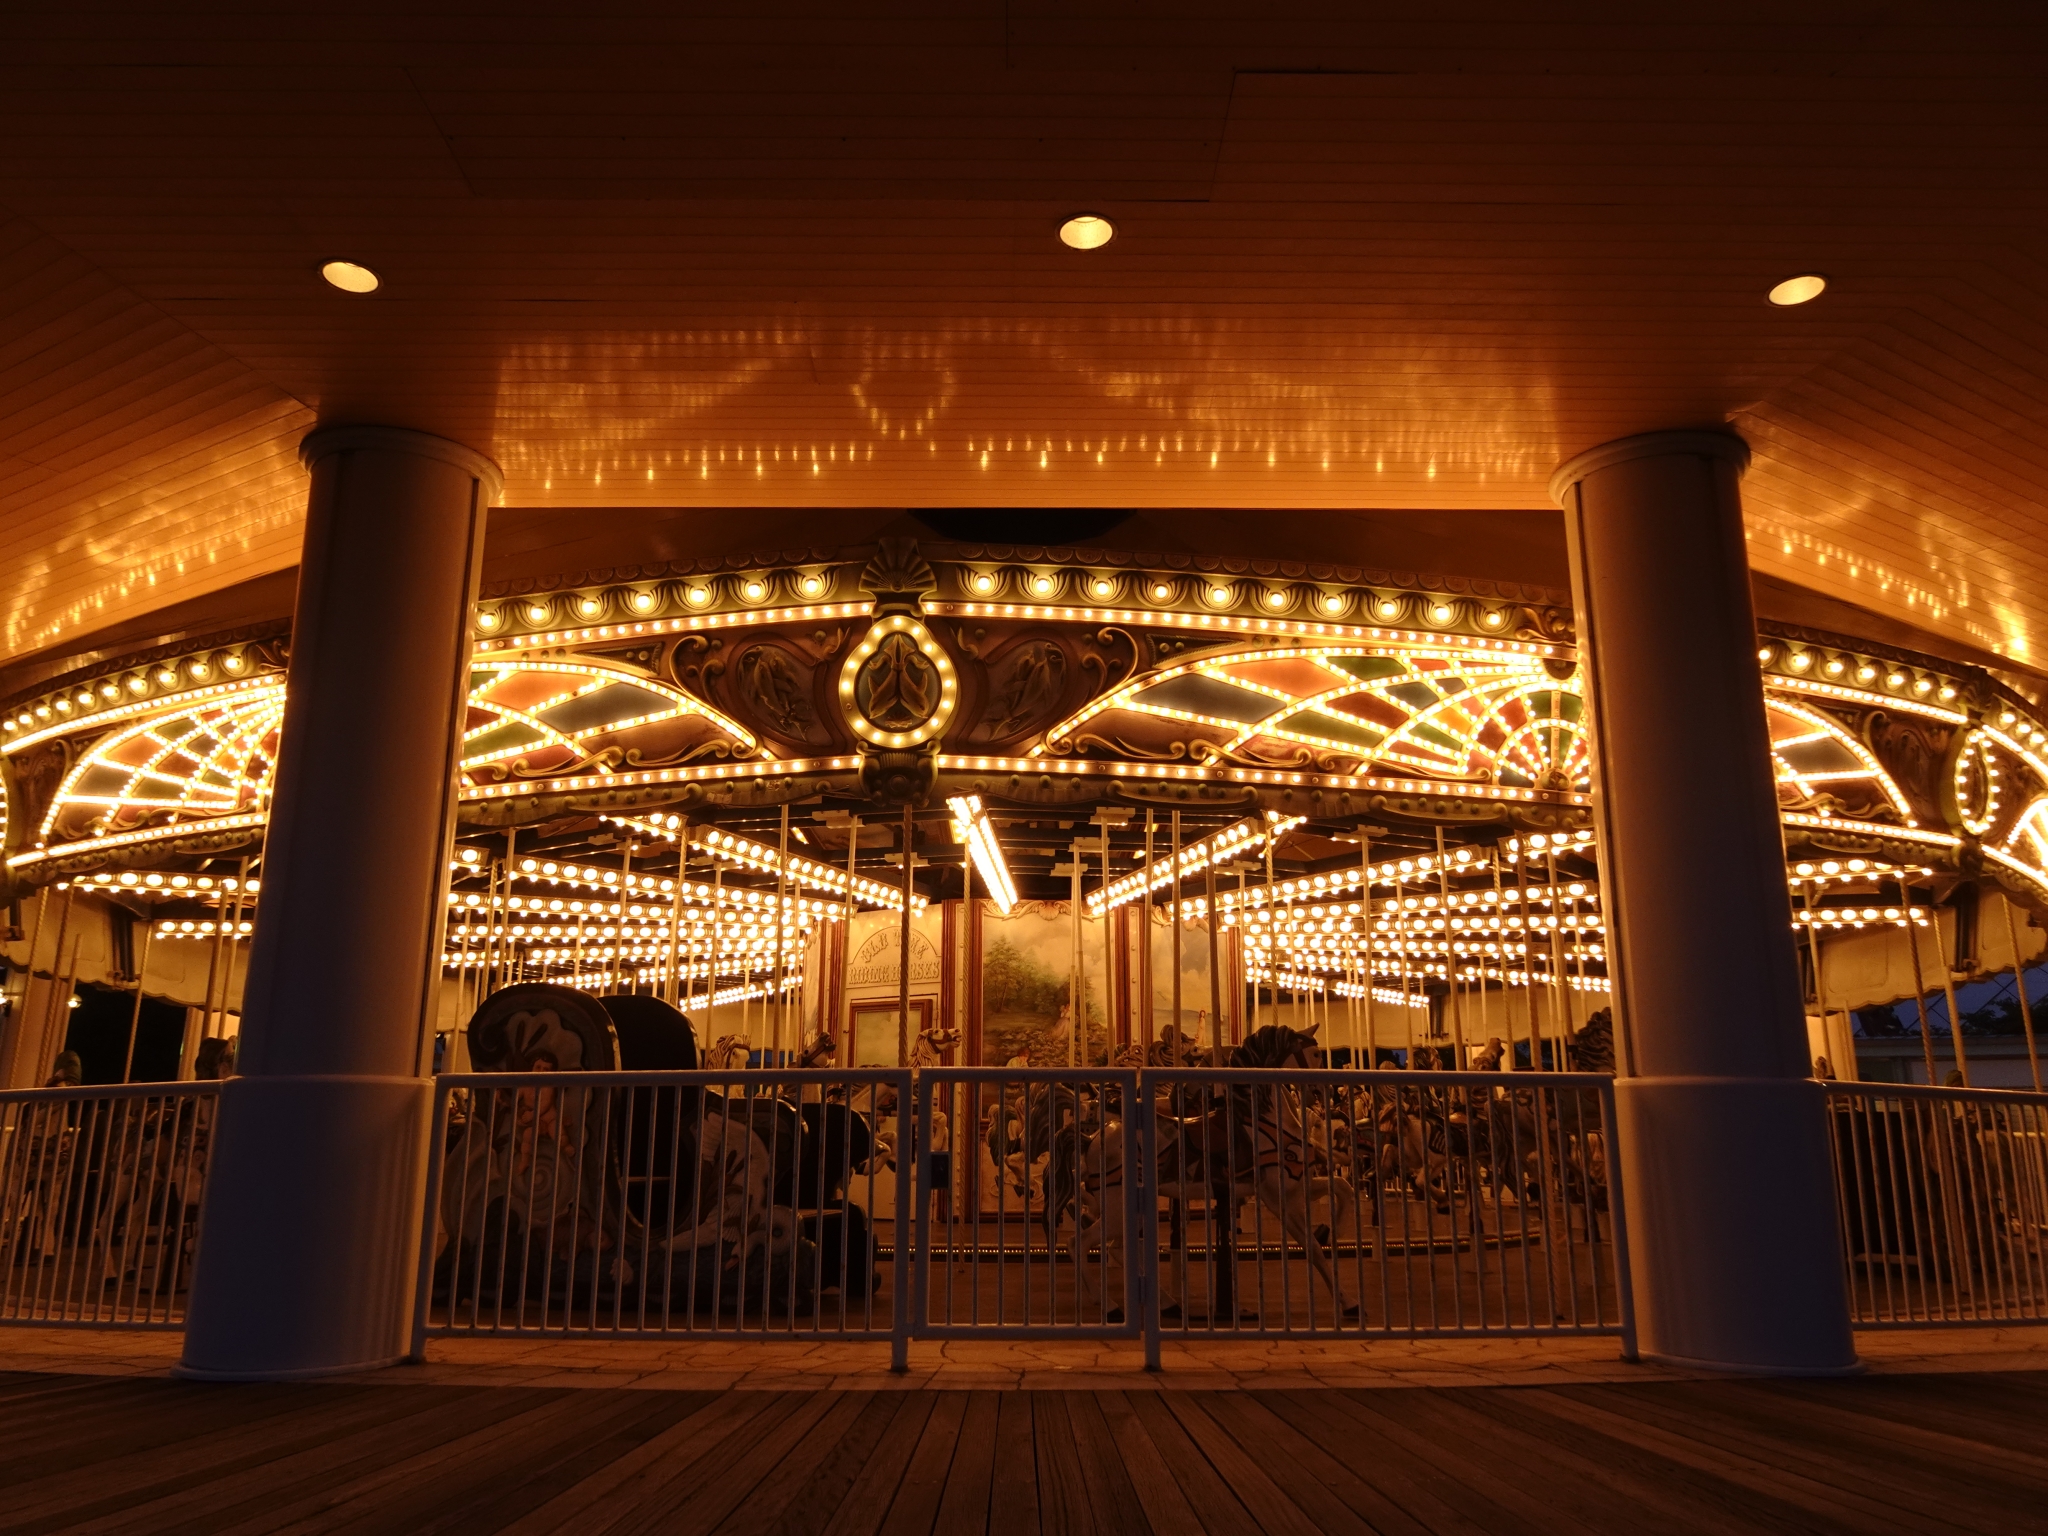 A carousel lit up at night